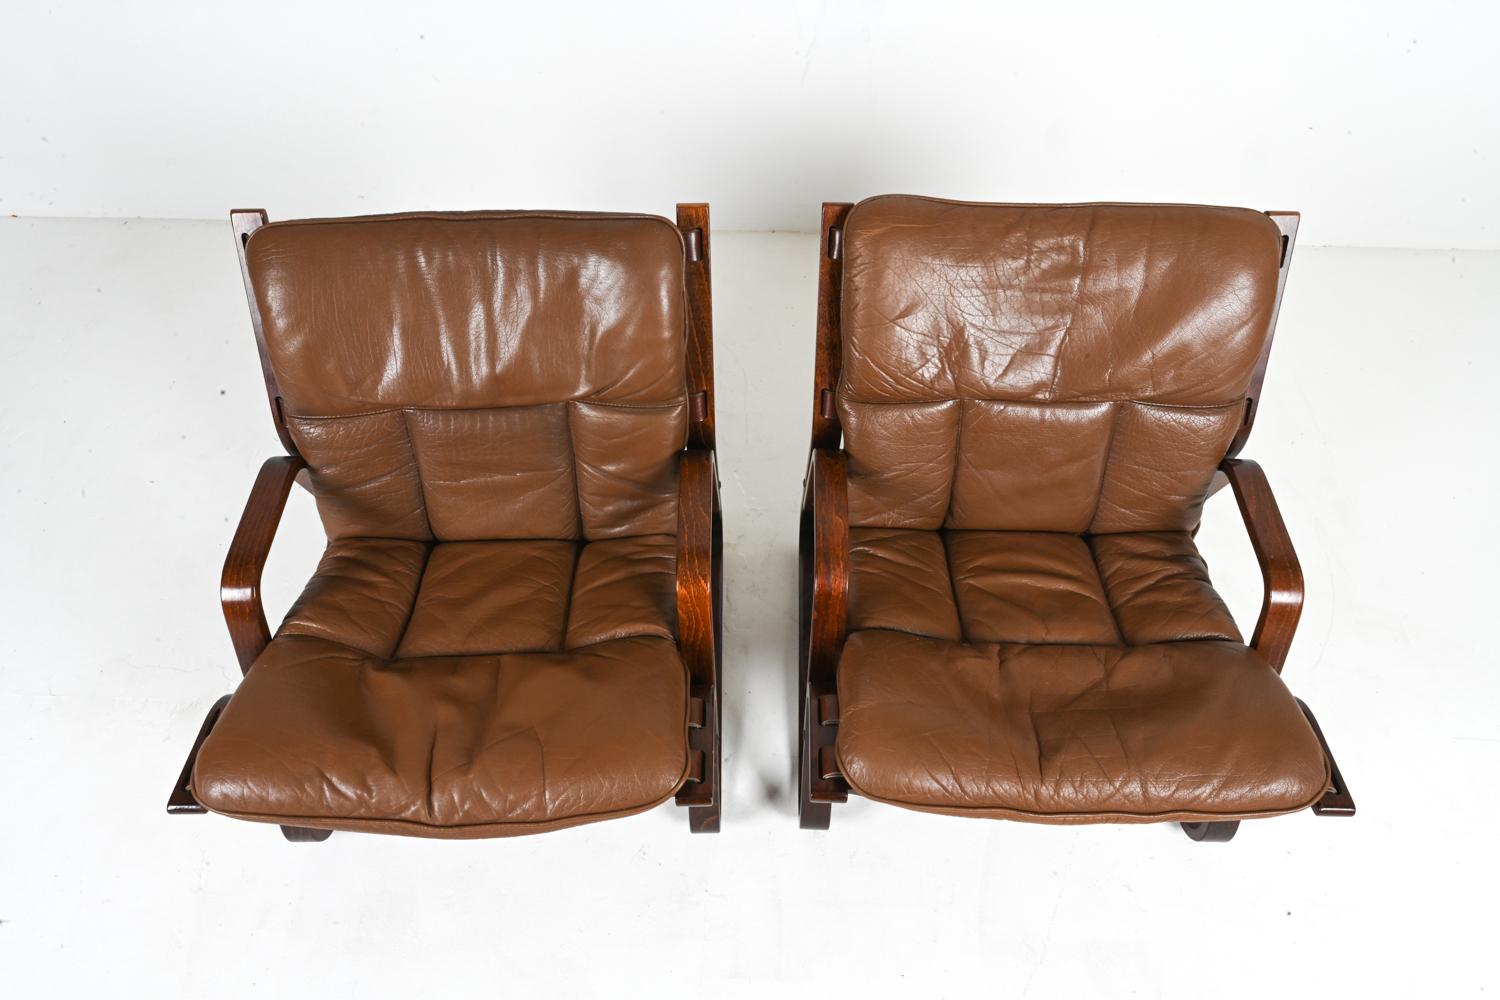 Pair of Bentwood & Buffalo Leather Lounge Chairs by Giske Carlsen for Kleppe In Good Condition For Sale In Norwalk, CT